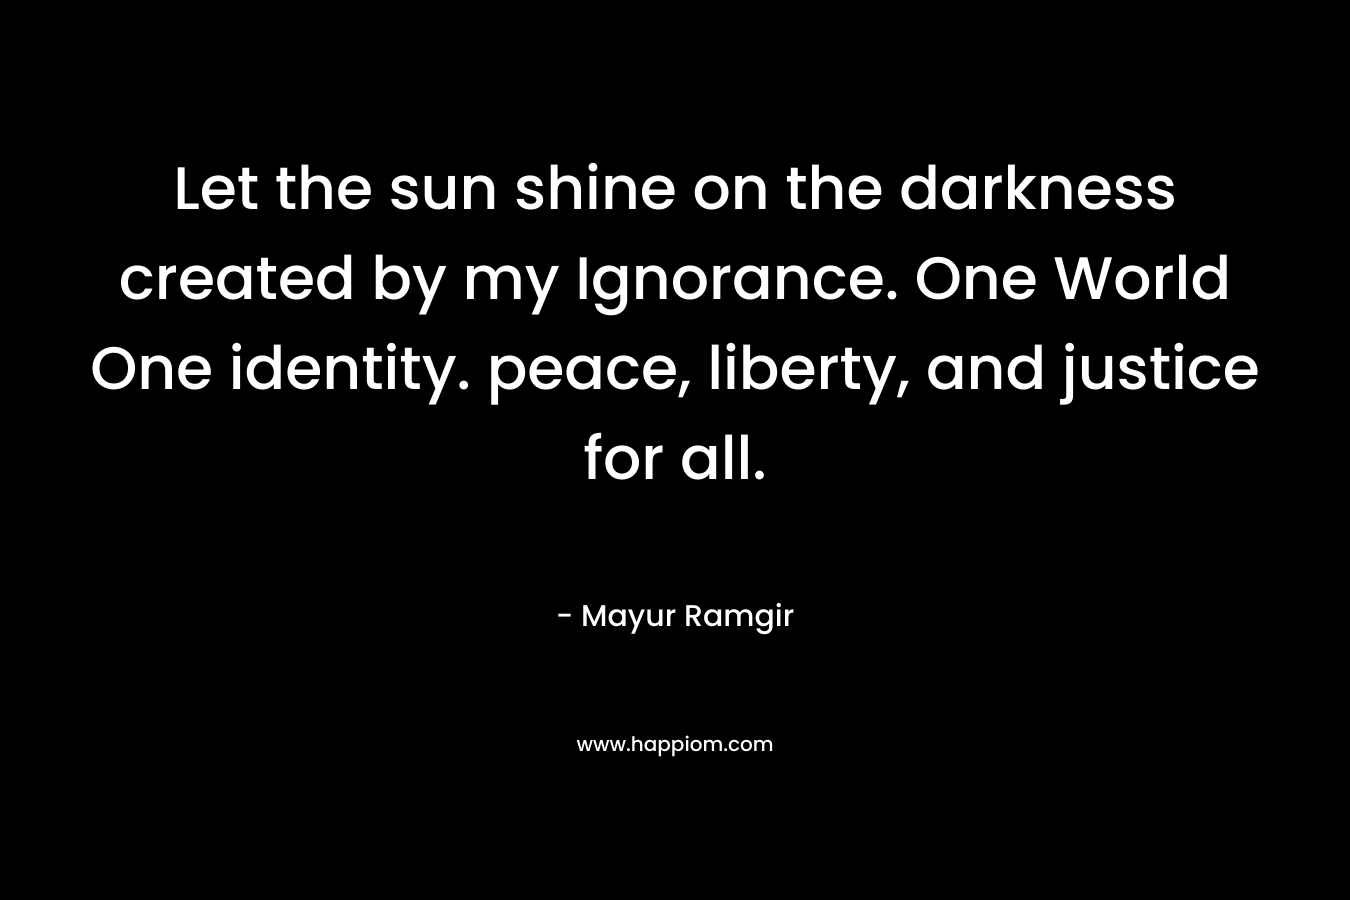 Let the sun shine on the darkness created by my Ignorance. One World One identity. peace, liberty, and justice for all.